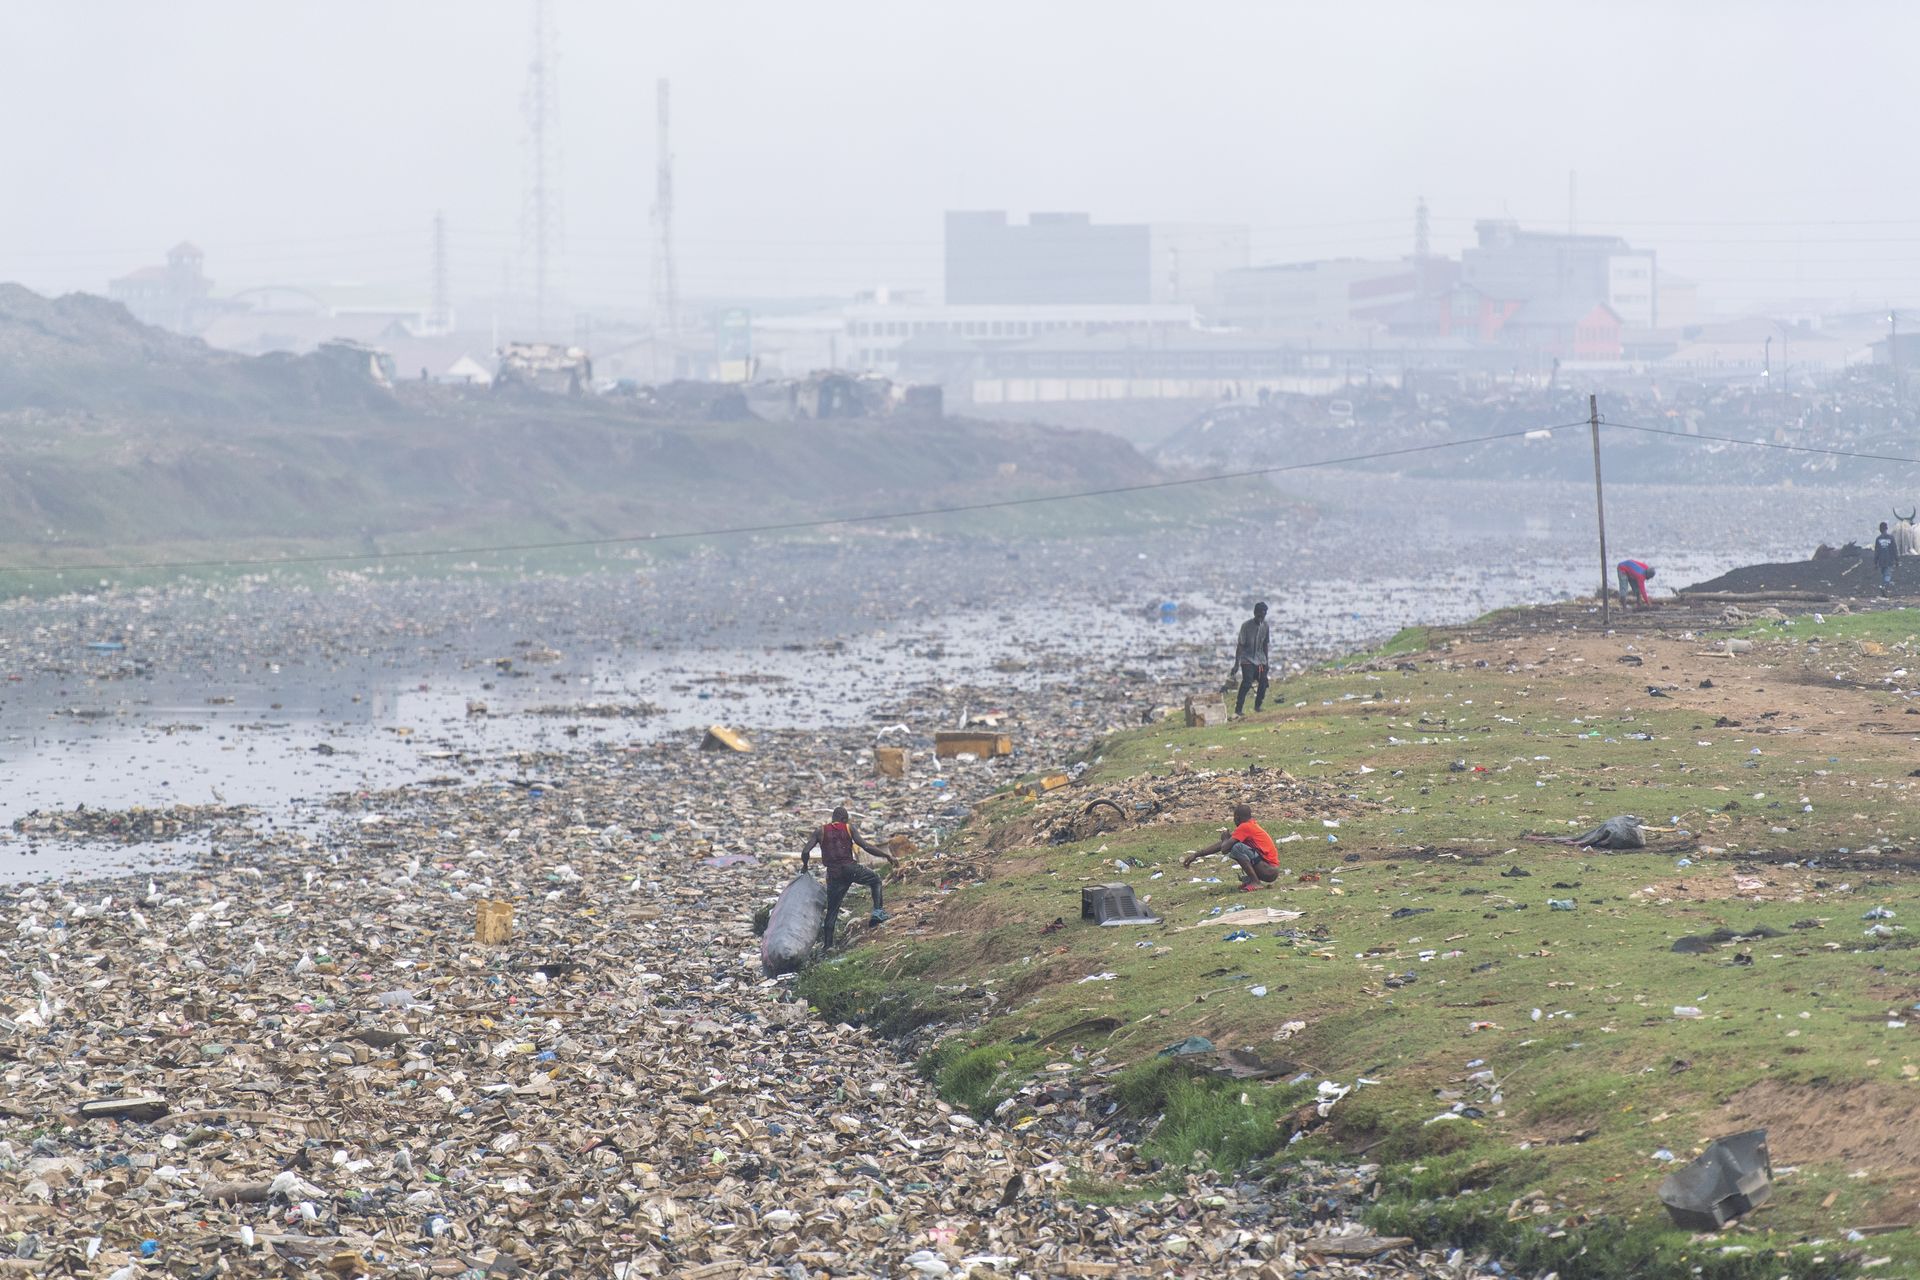 The major environmental problem of open-air landfills around the world